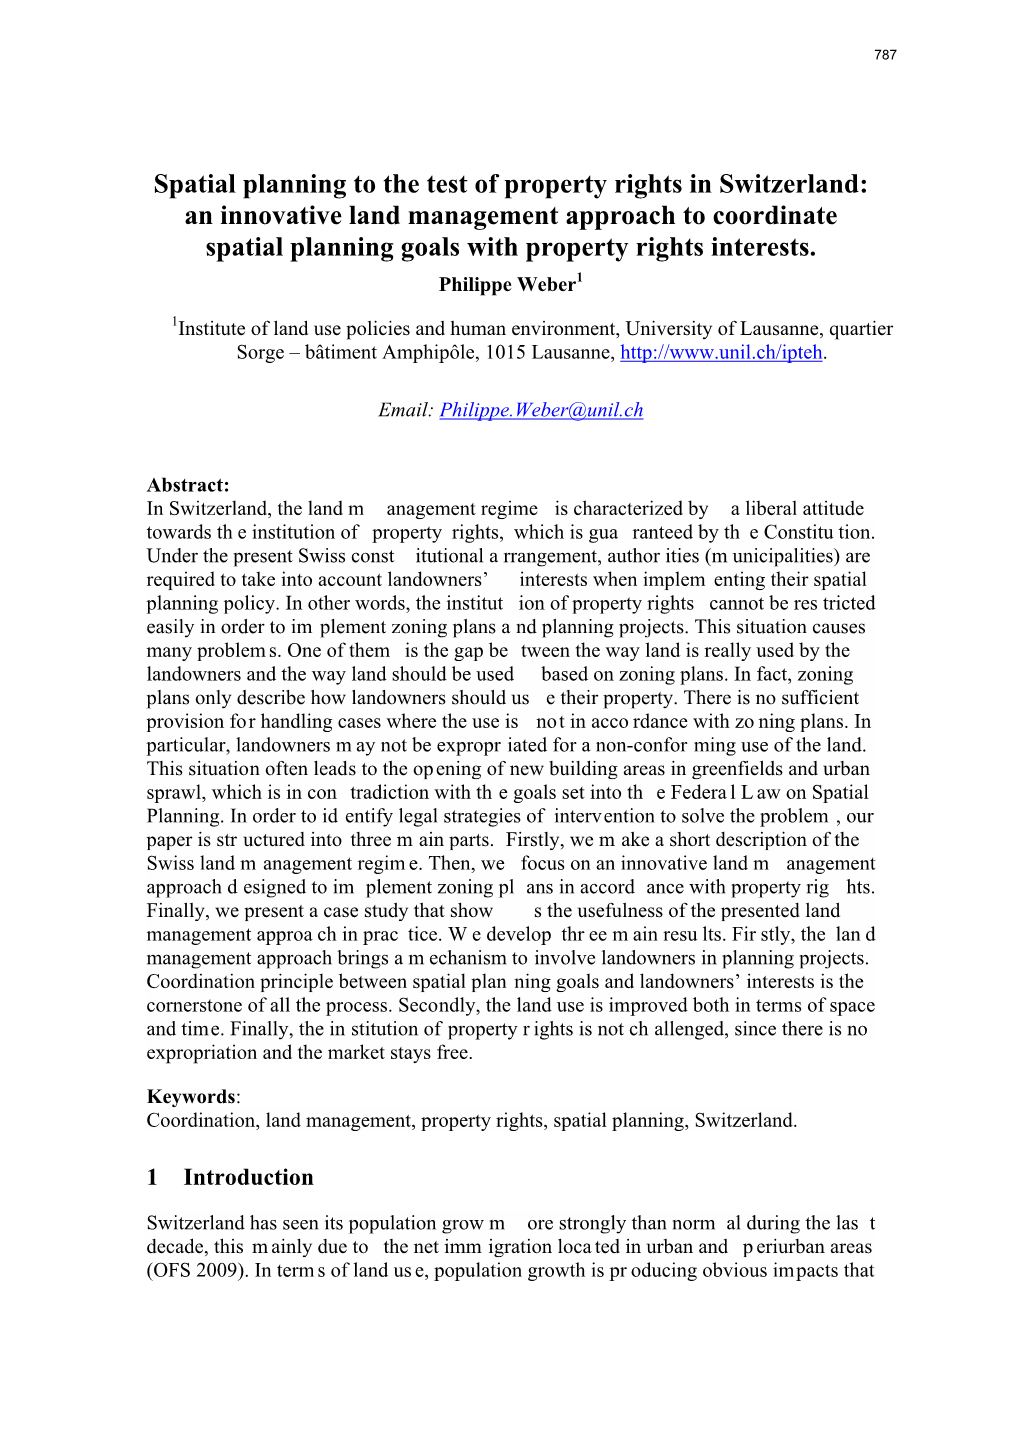 Spatial Planning to the Test of Property Rights in Switzerland: an Innovative